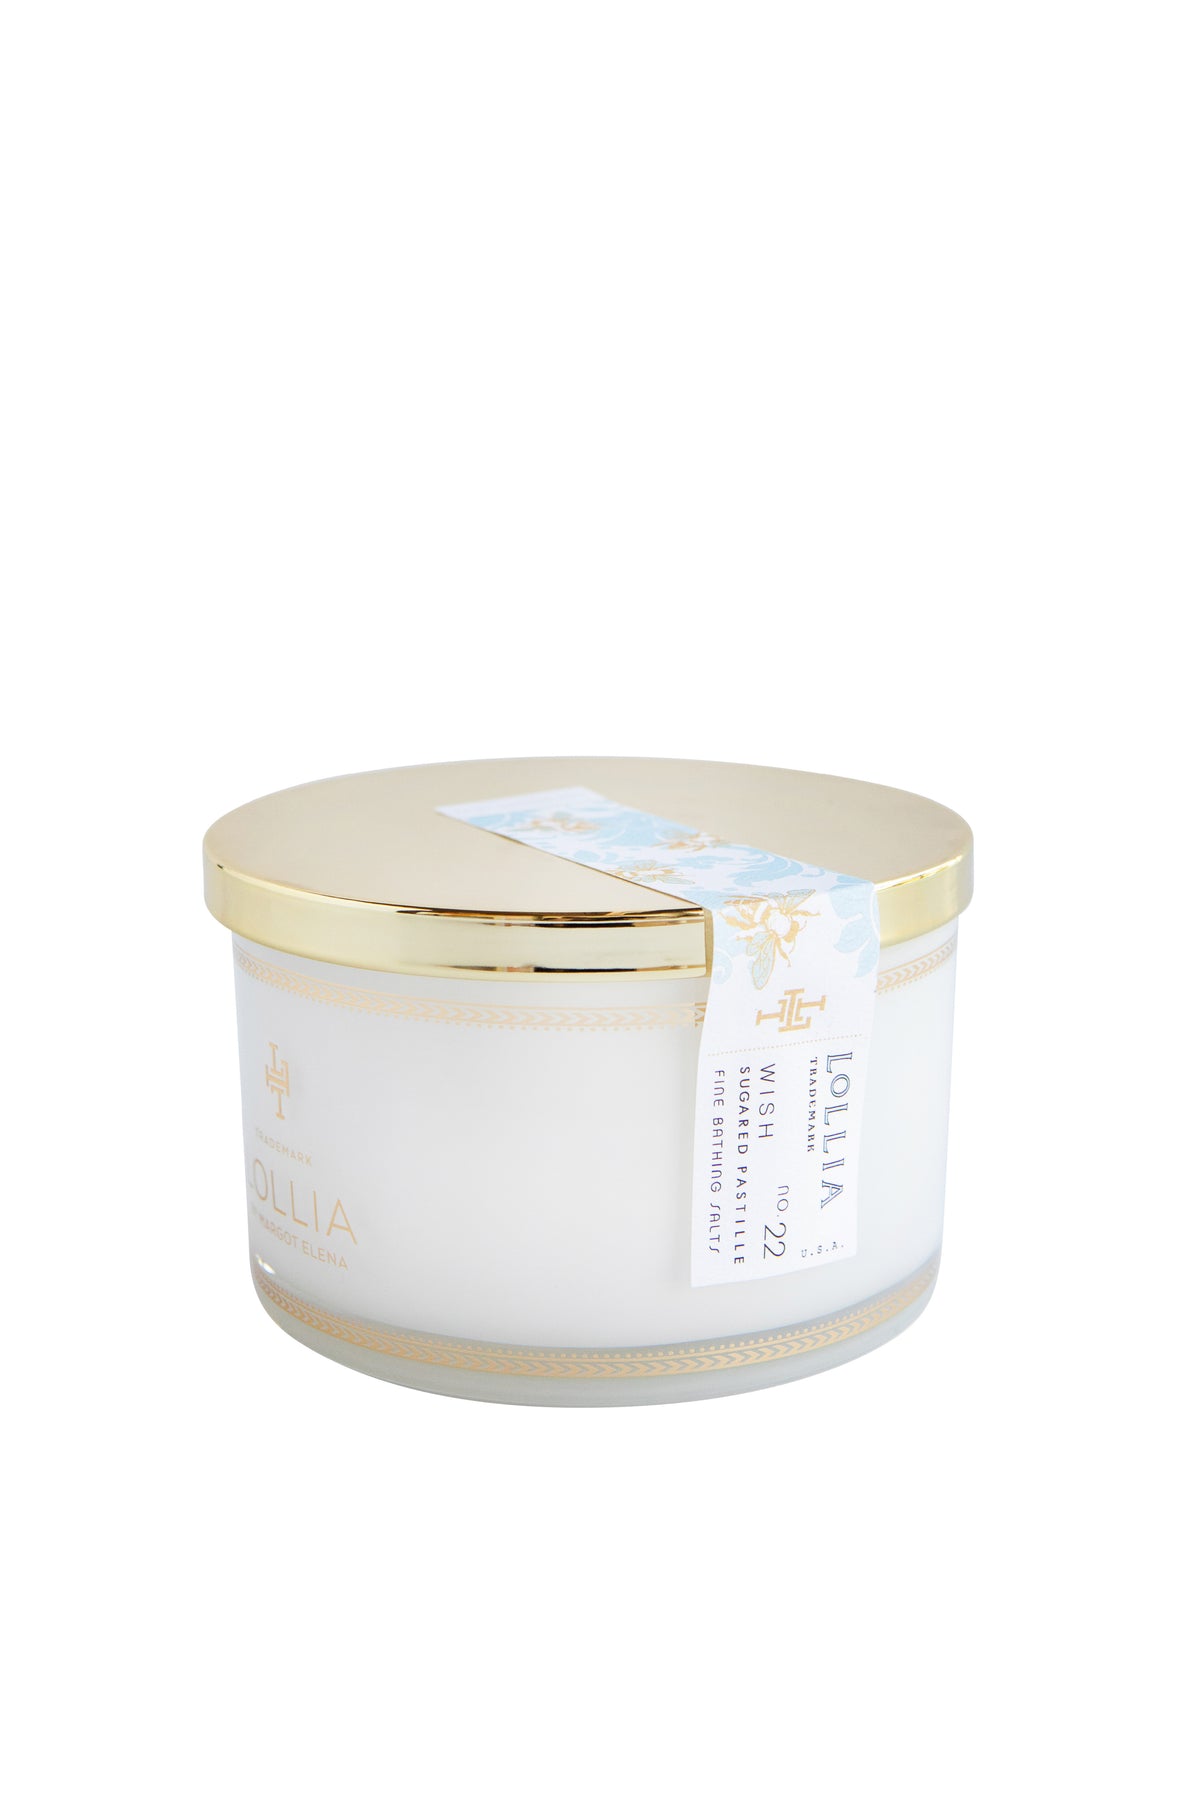 A cylindrical Margot Elena branded hand cream container with a metallic golden lid, featuring elegant white and turquoise labels adorned with Lollia Wish Fine Bathing Salts, isolated on a white background.